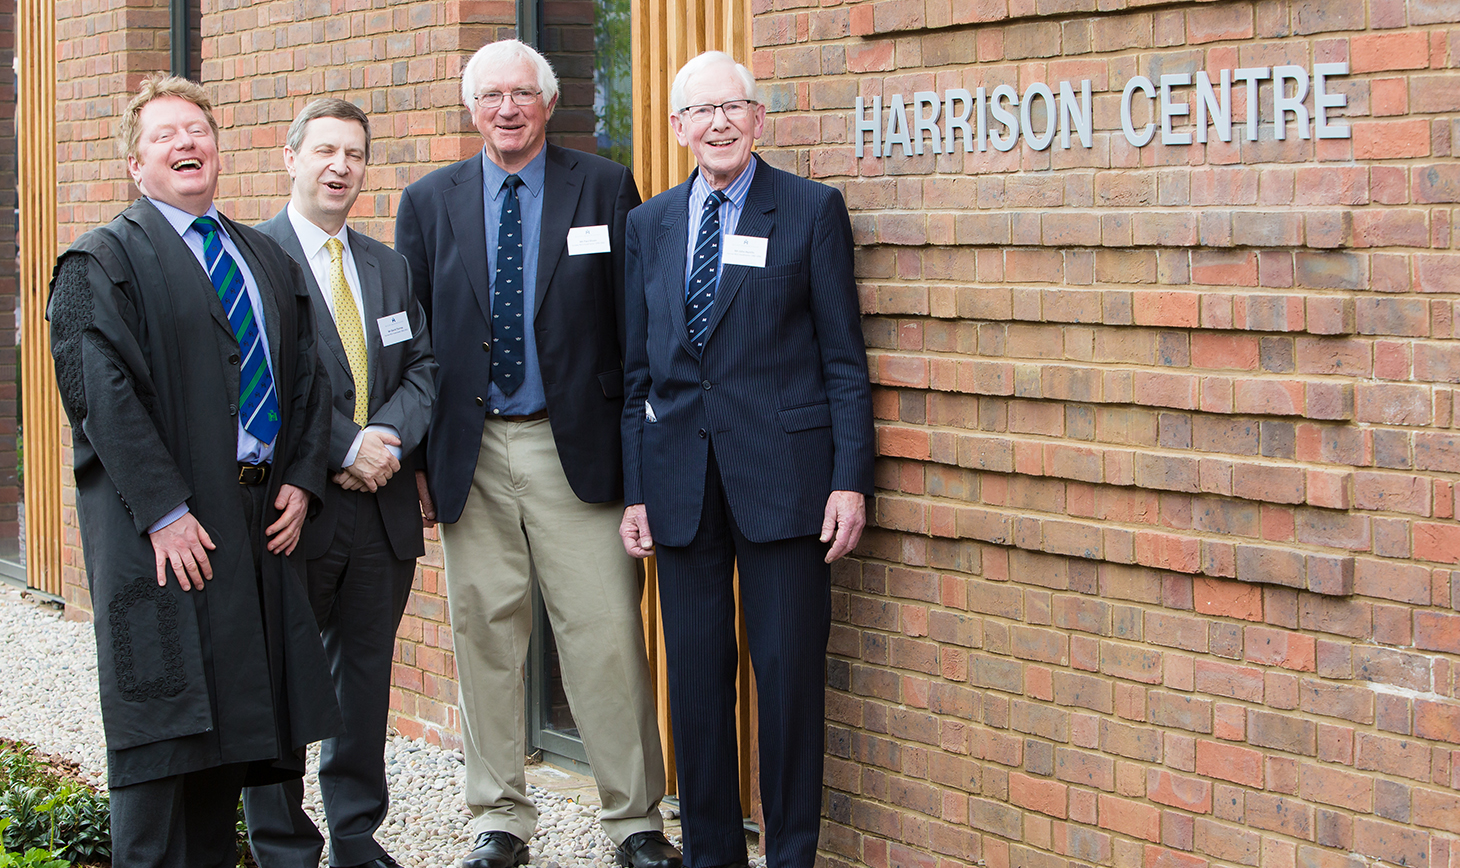 Opening of the Harrison Centre